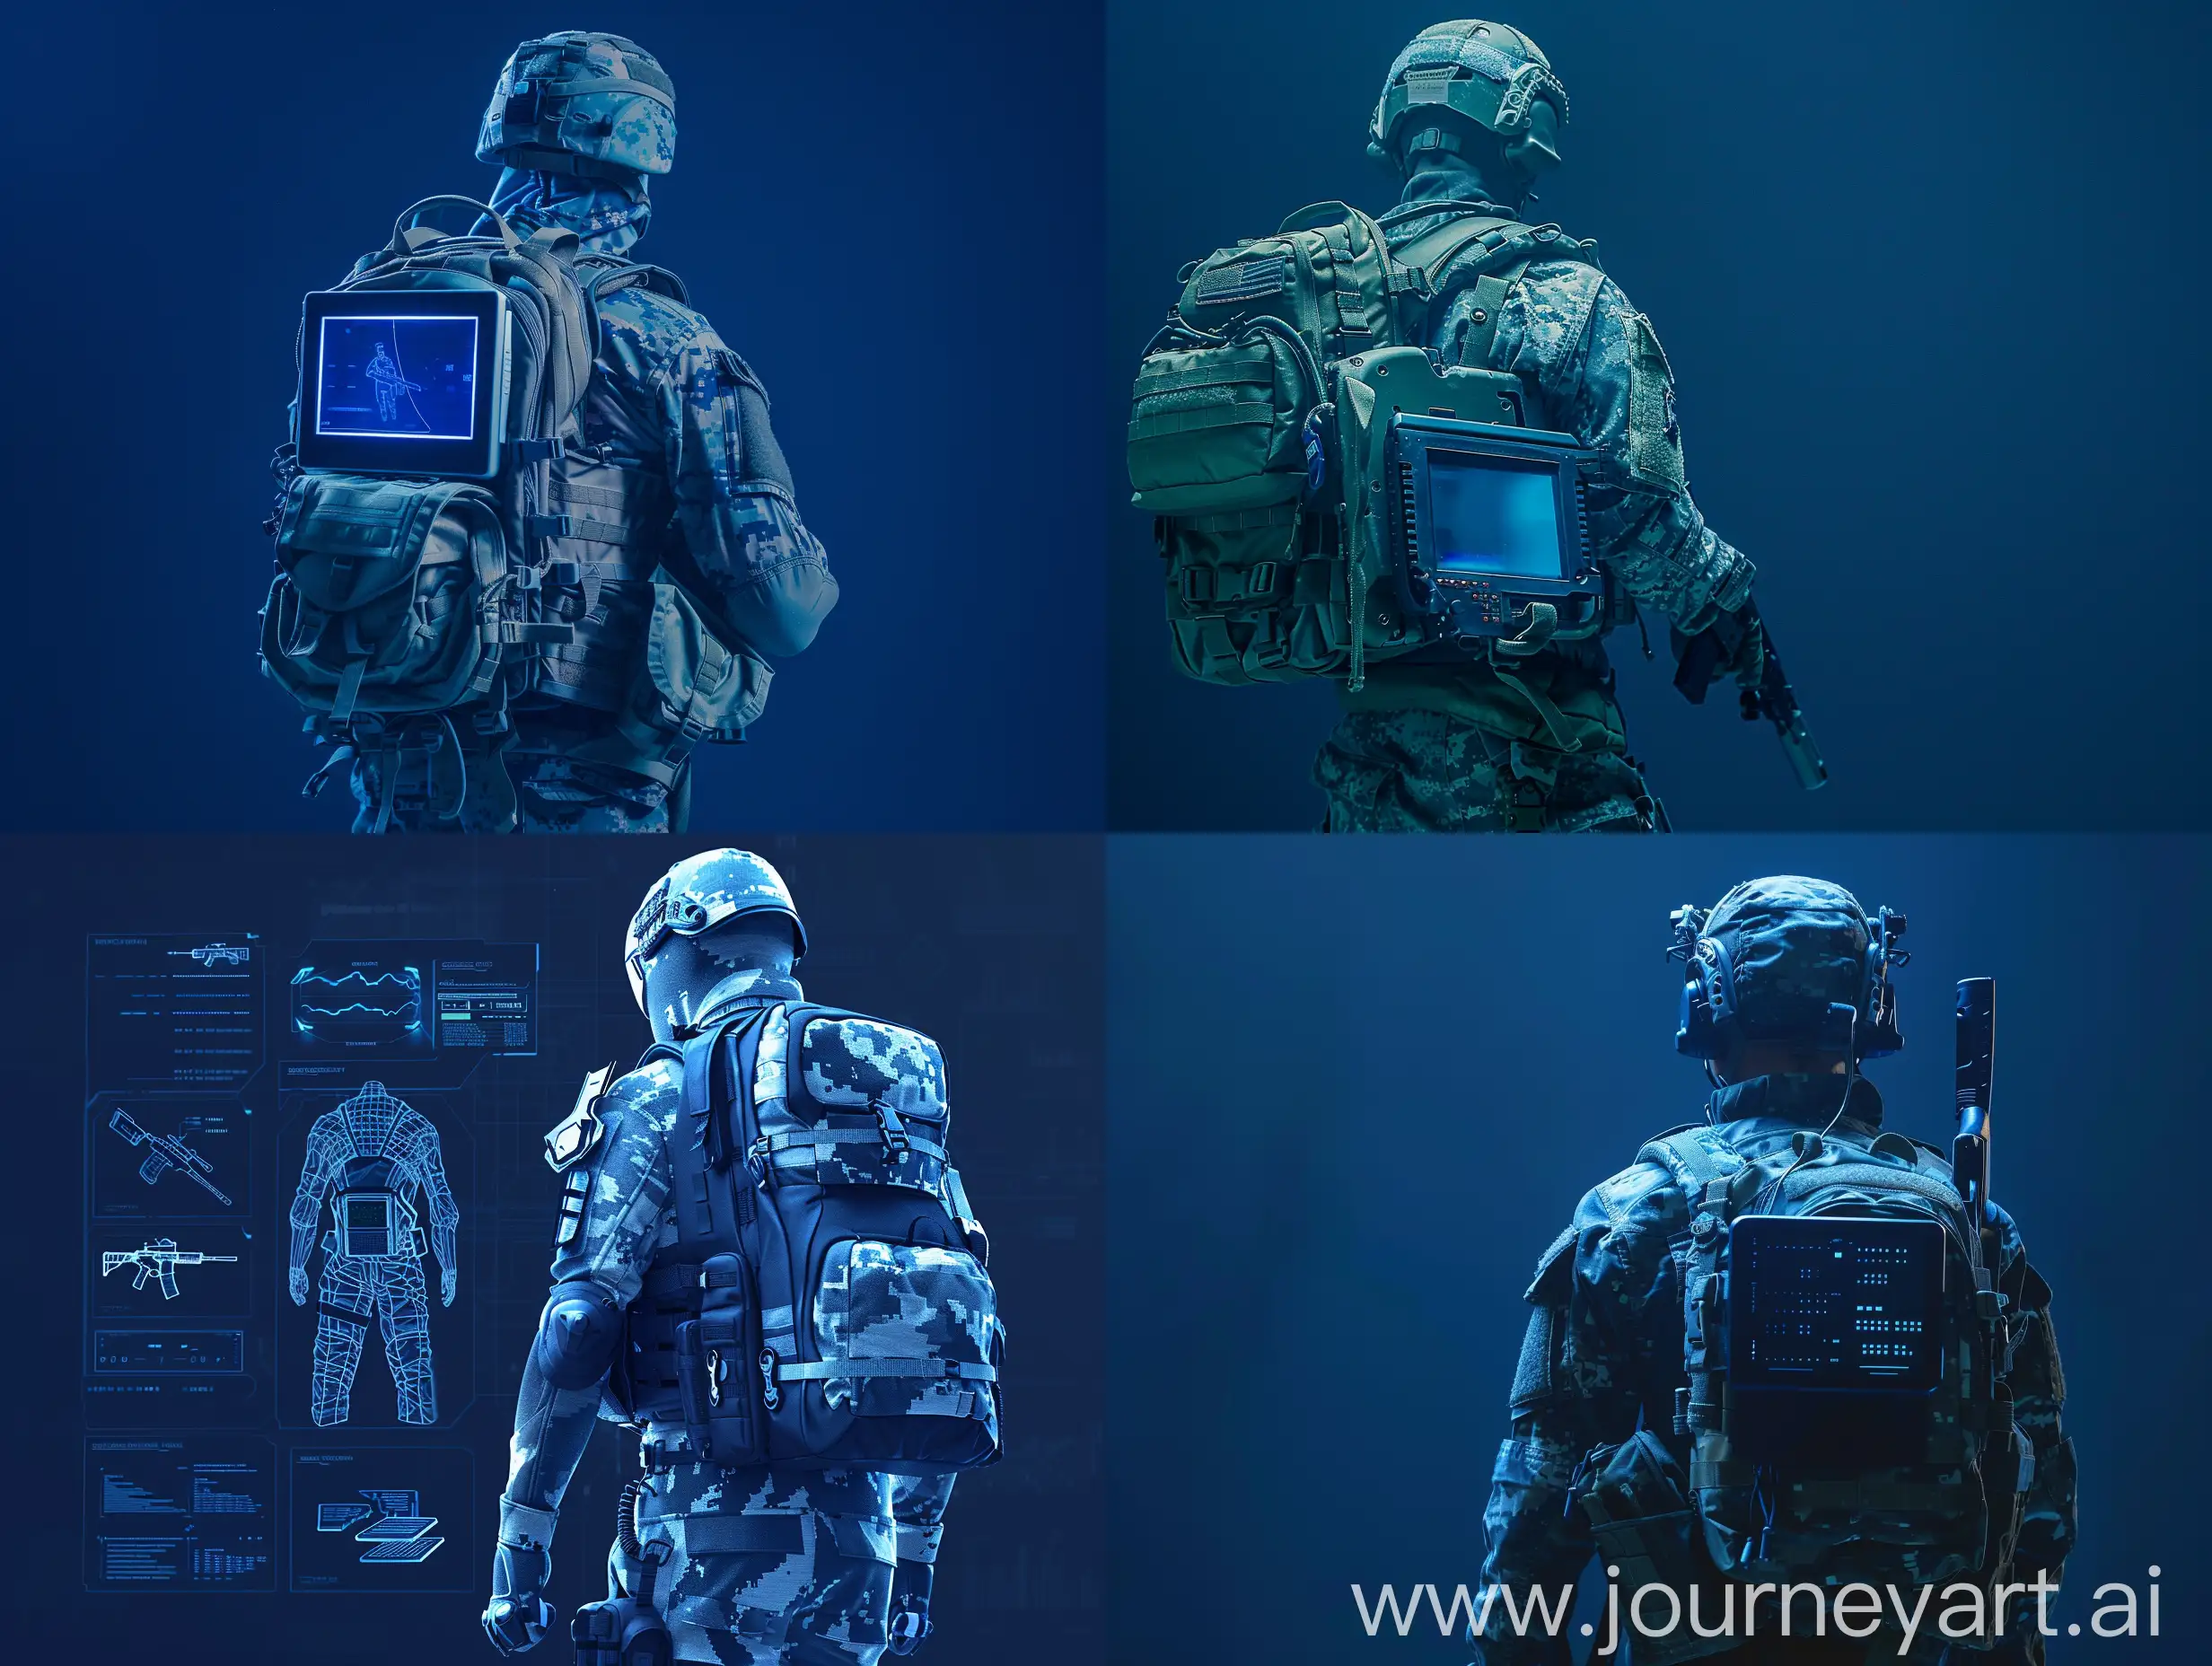 Recruit training system, simulation of combat, big scene whole body, dark blue background, individual soldier simulator, knapsack computer, simulated firearms weapons, future science and technology sense